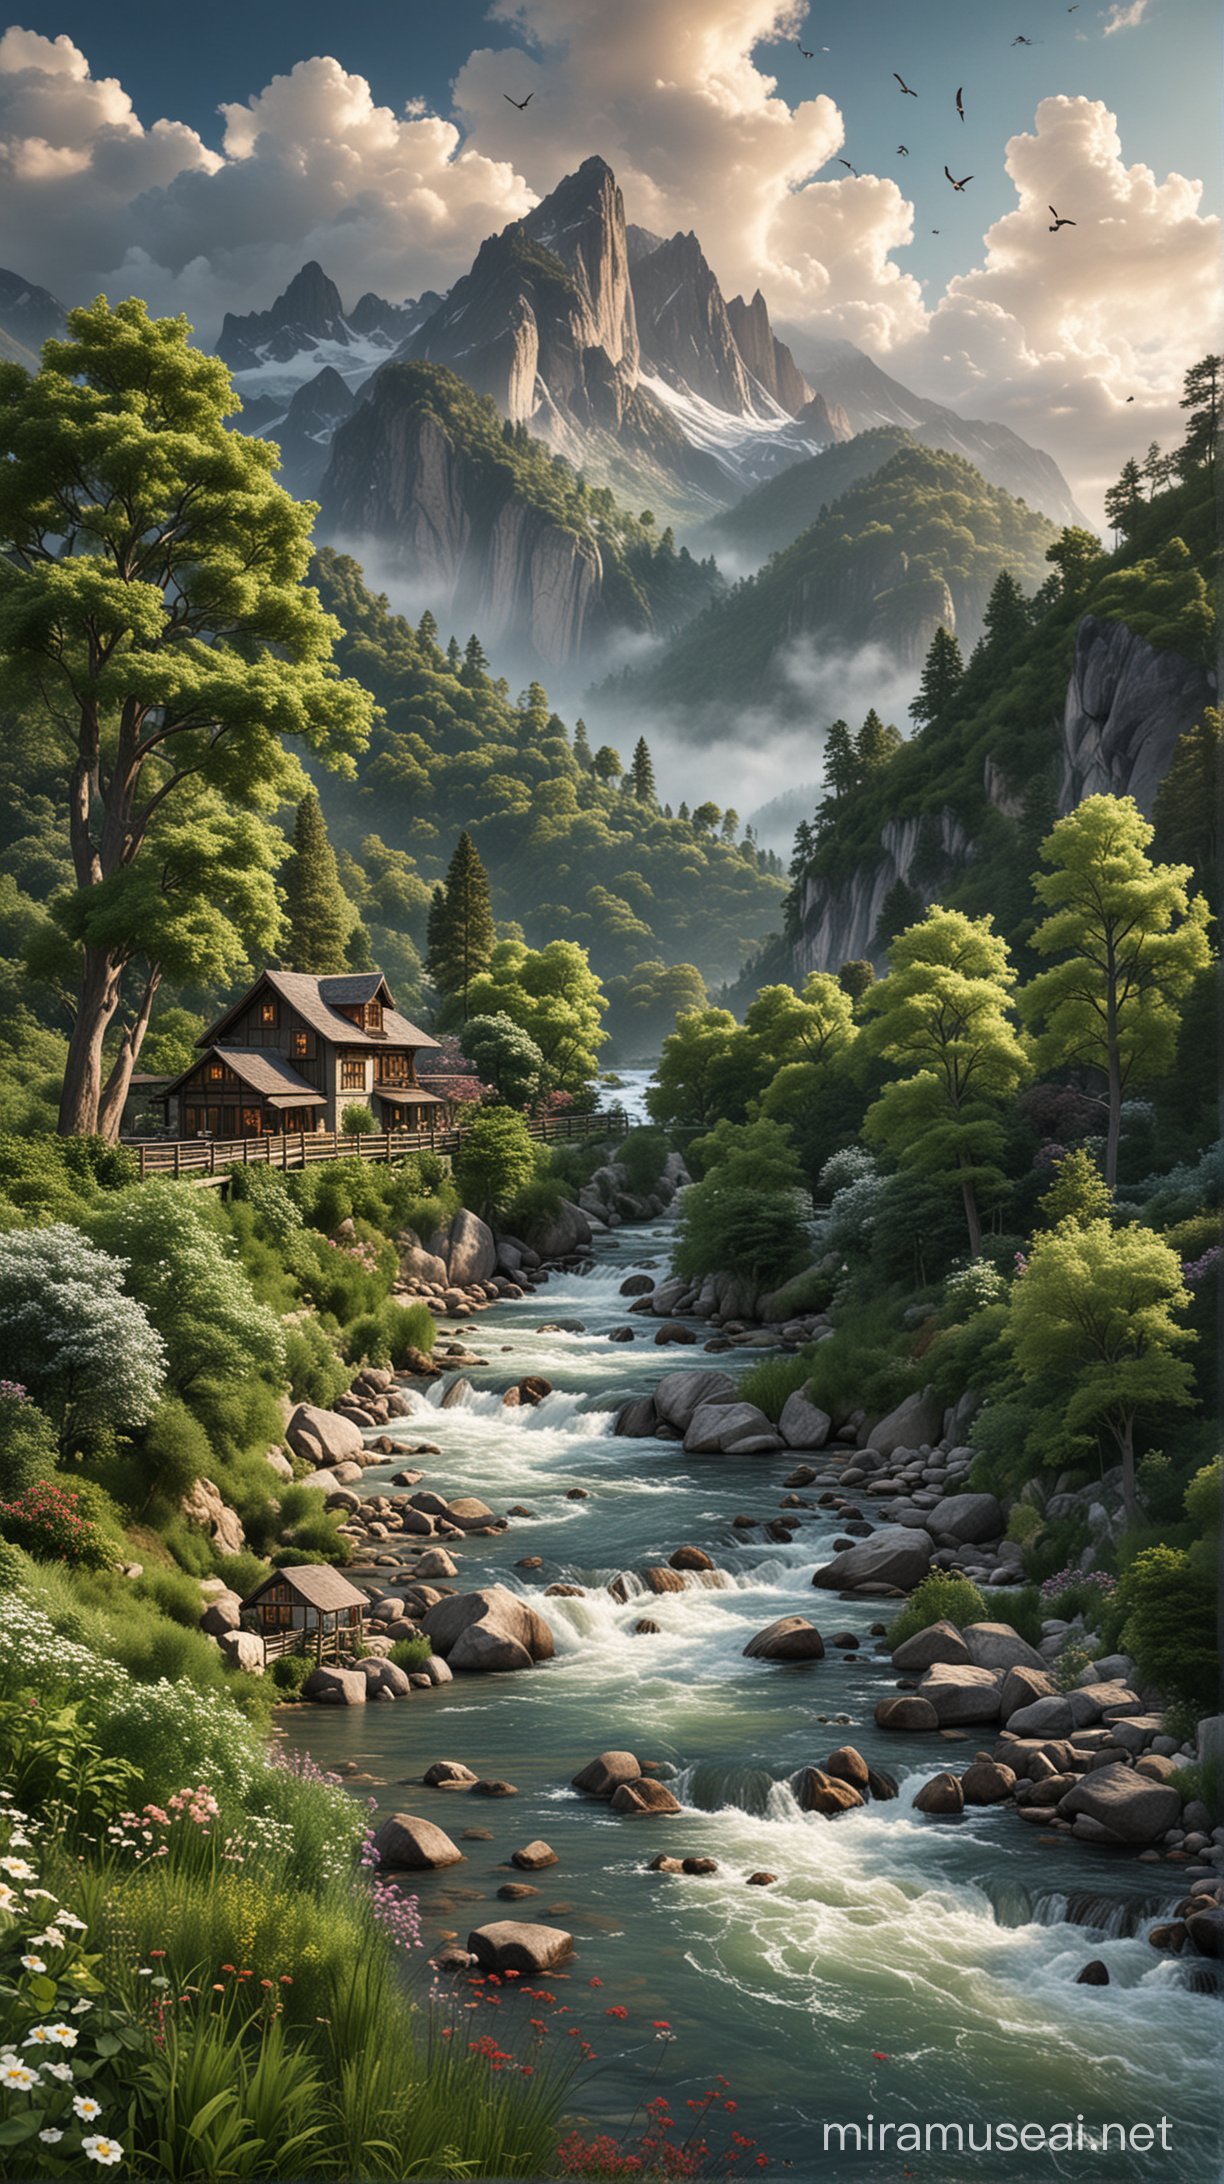 Majestic Mountain Landscape with Tranquil River and Quaint House